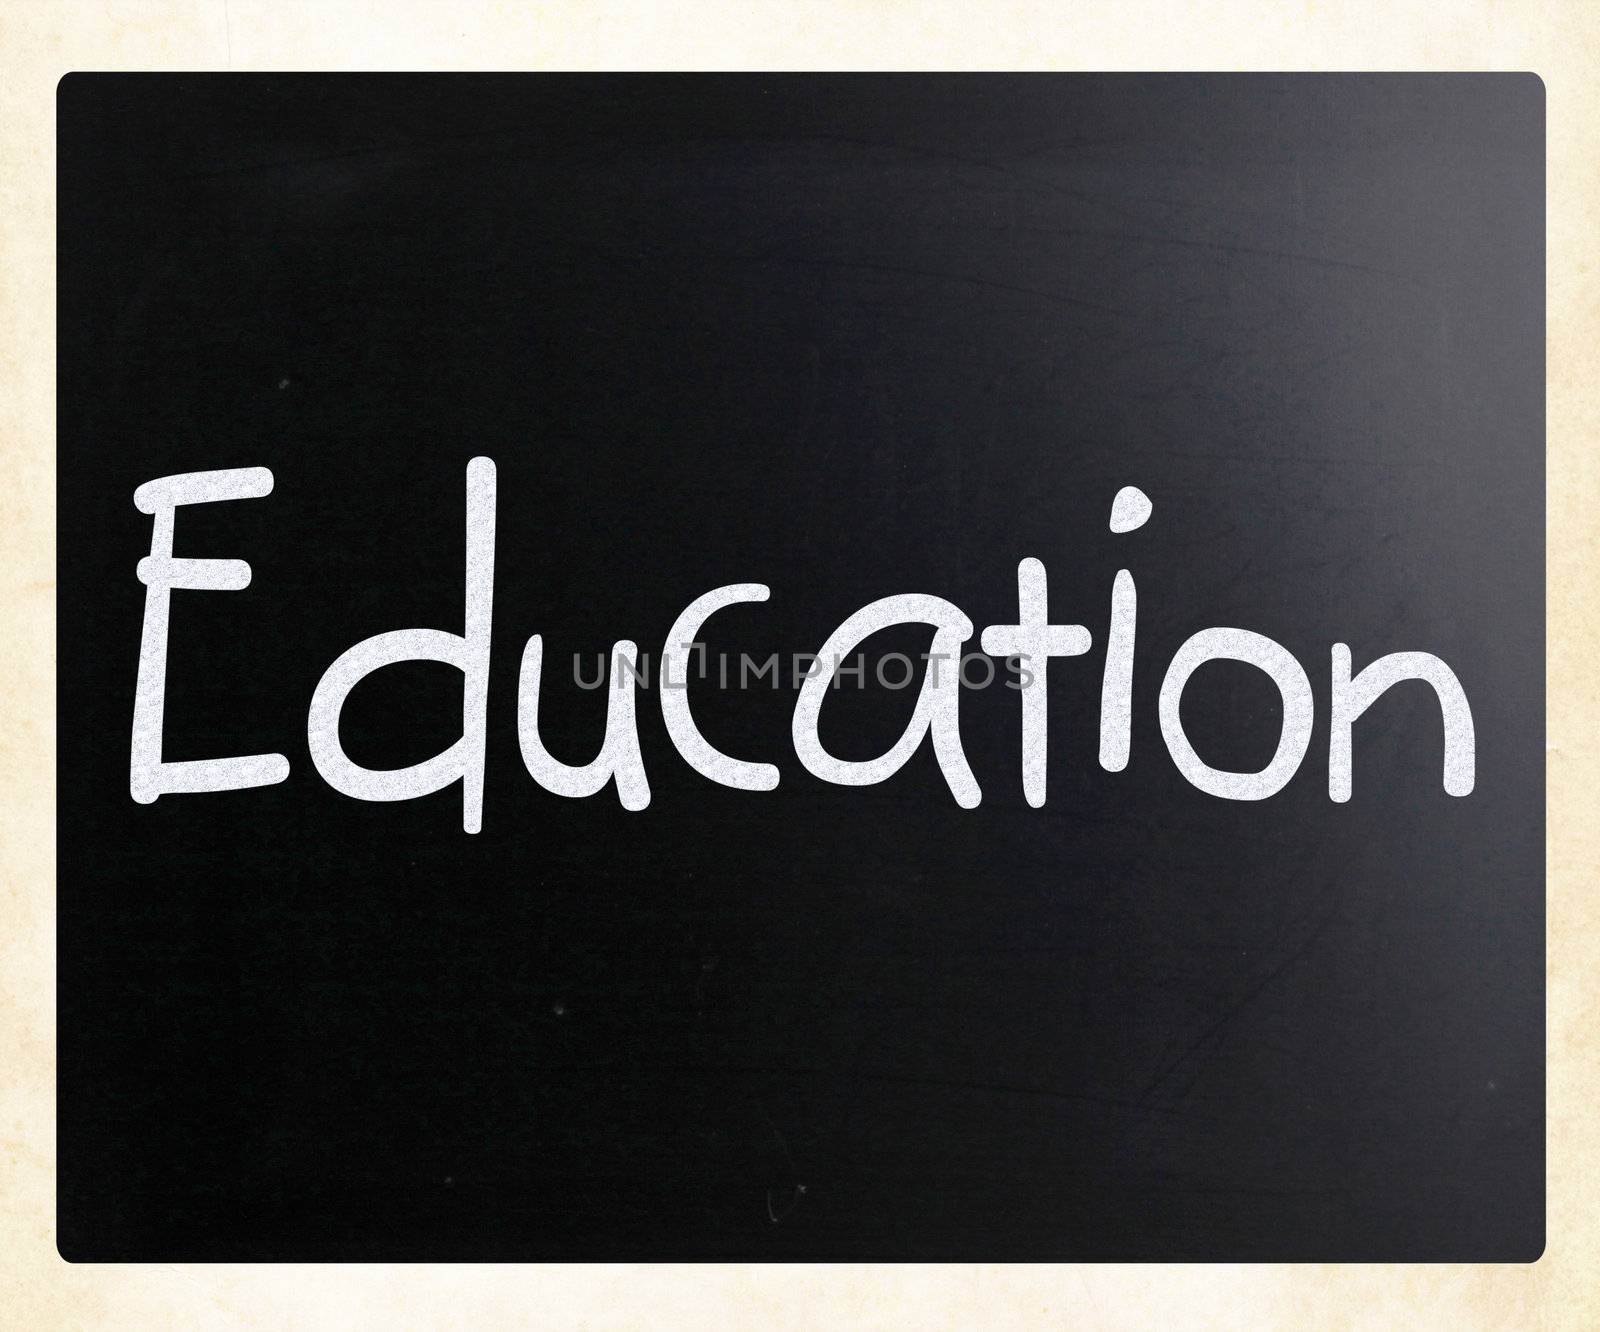 The word "Education" handwritten with white chalk on a blackboard